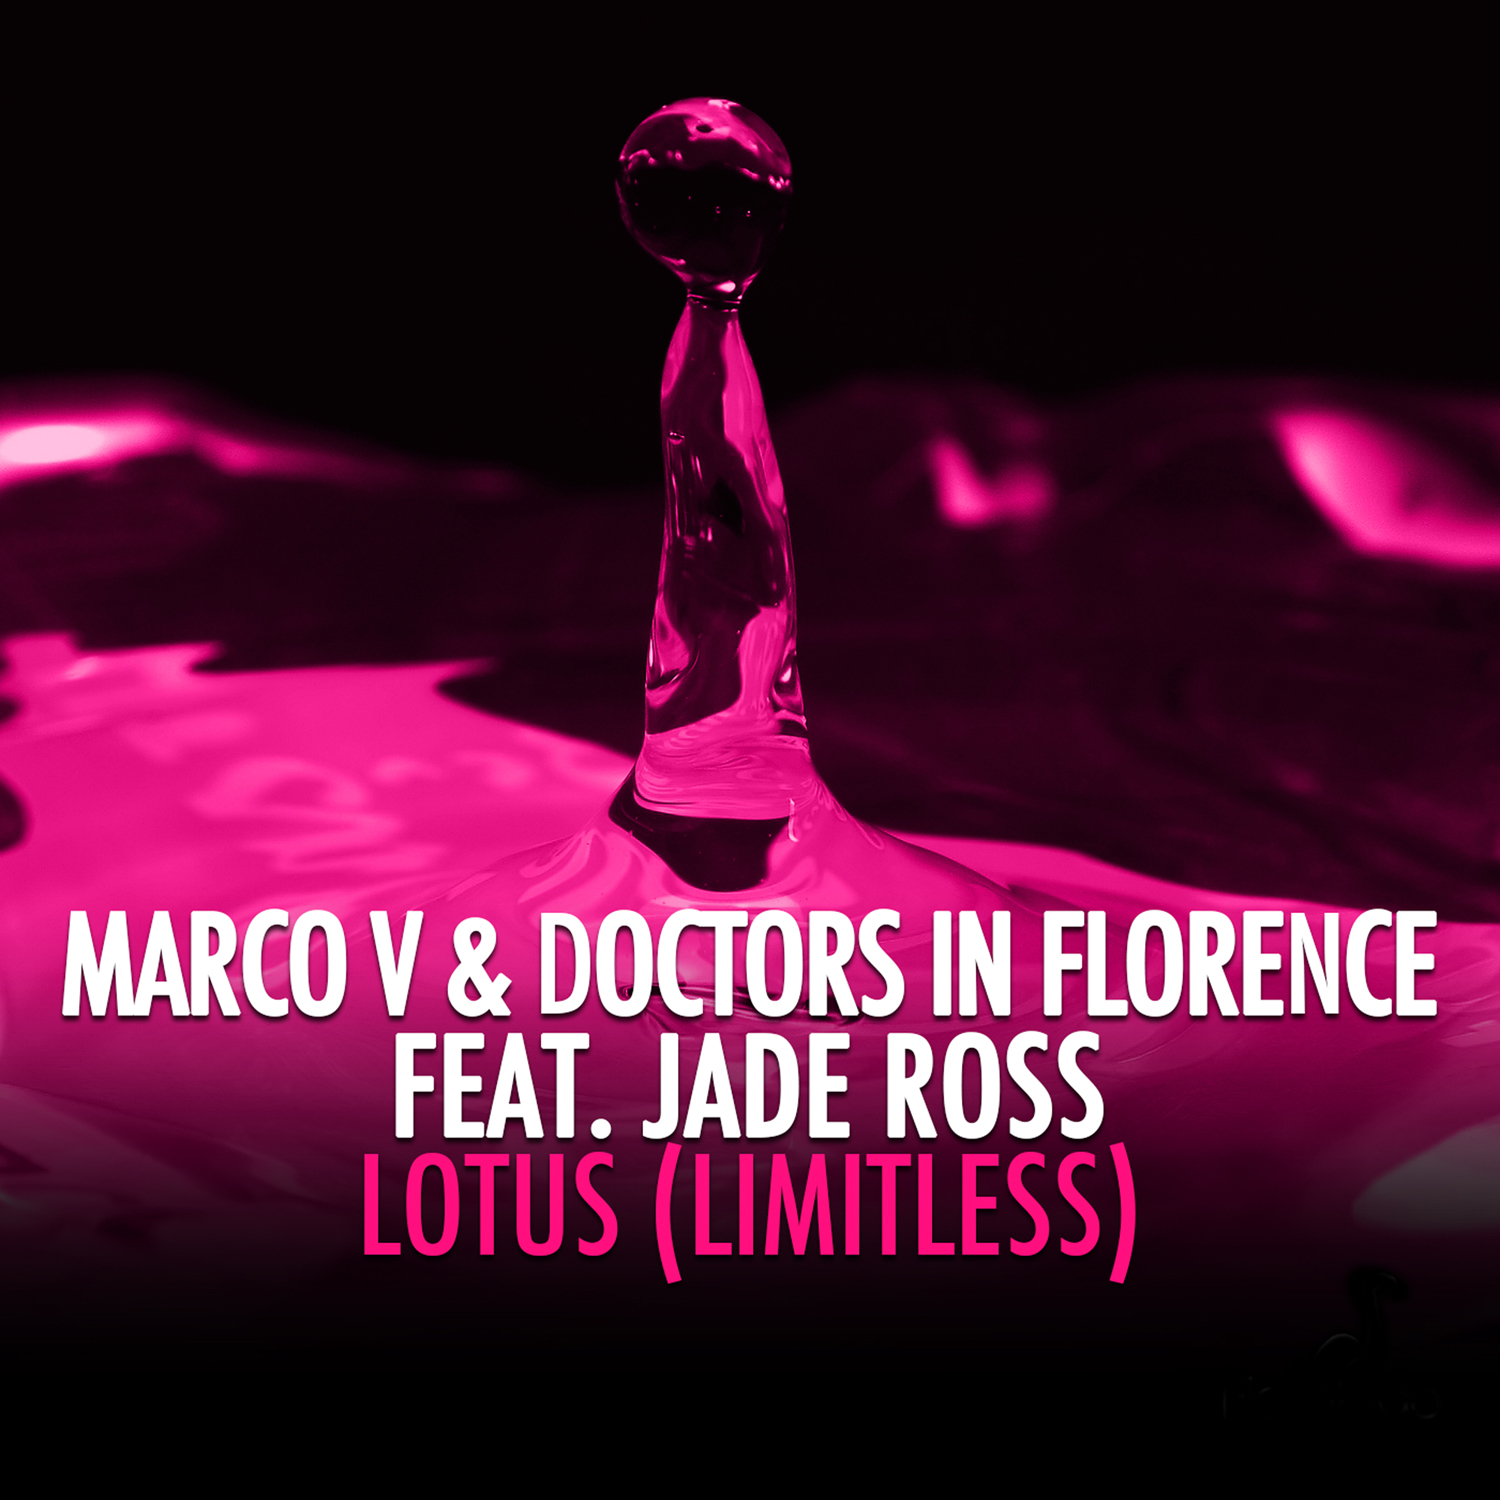 Marco V & Doctors In Florence feat. Jade Ross - Lotus (Limitless) (Darwin & Backwall Remix)